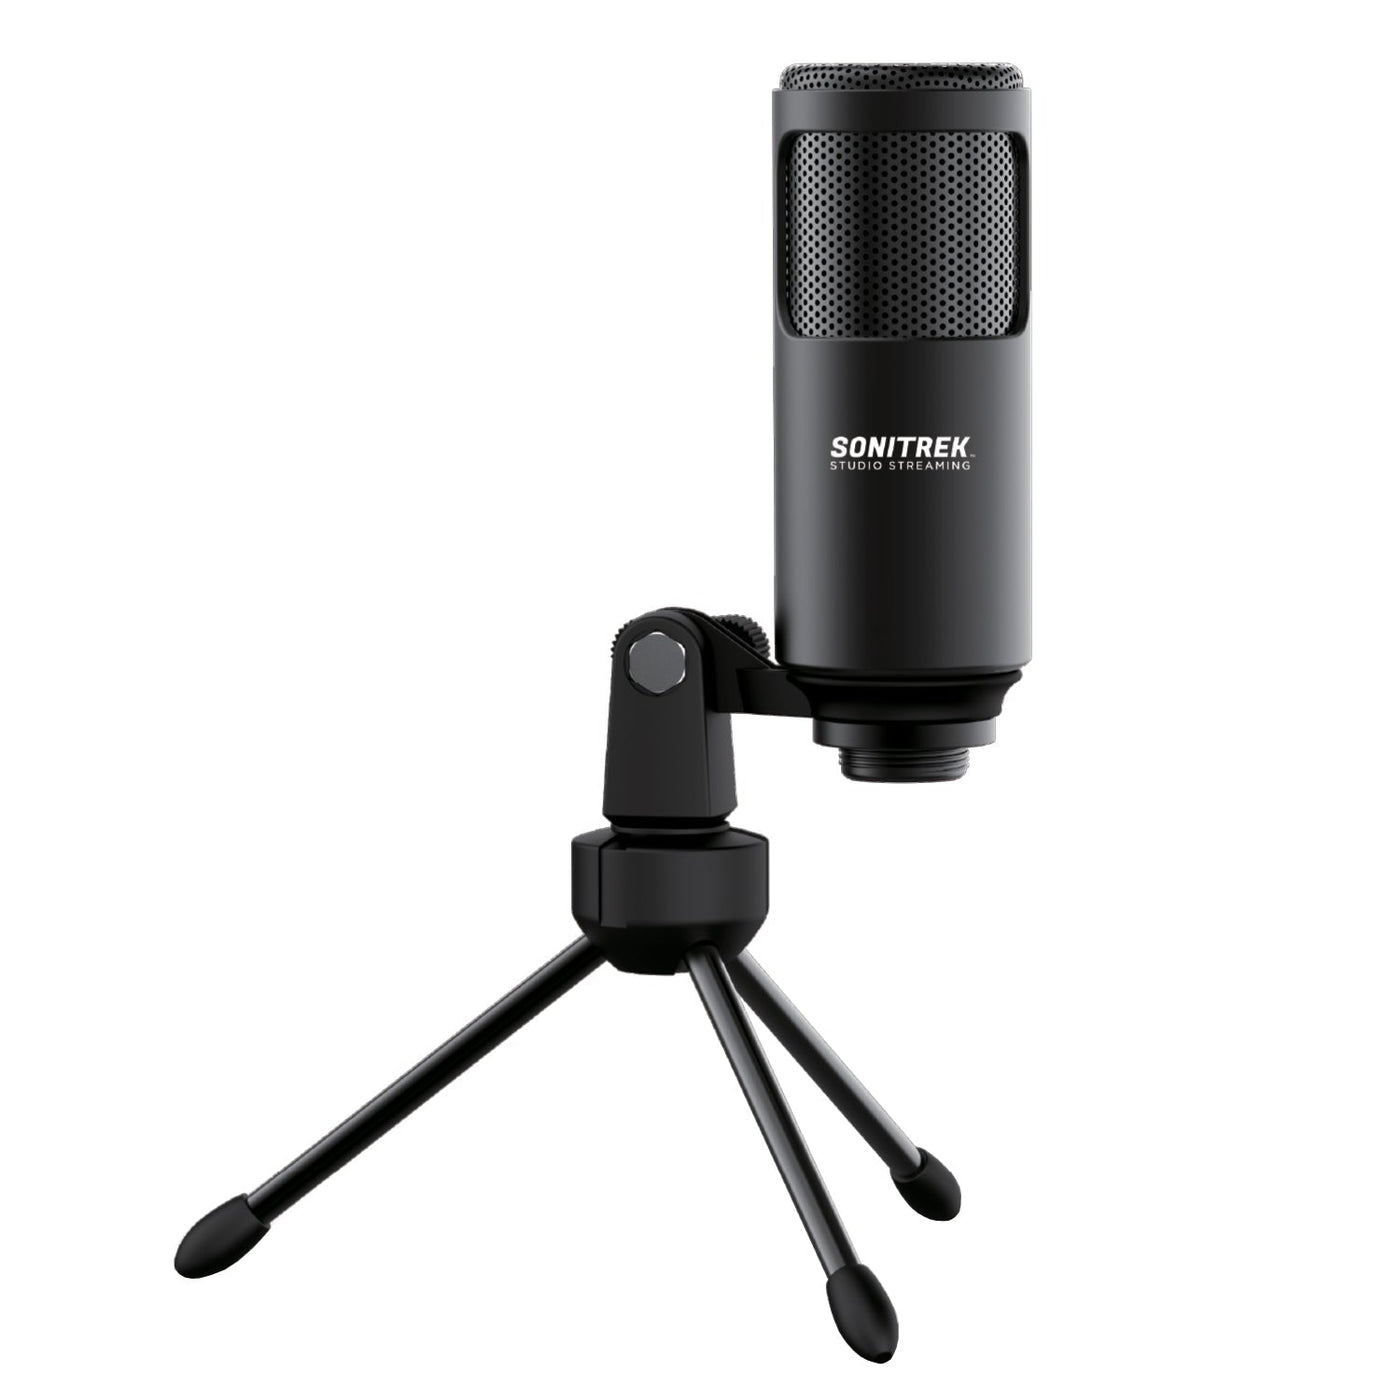 Sonitrek Studio Streaming Podcaster USB Microphone With Desk Tripod by Mifo USA - The World's Most Advanced Wireless Earbuds for Active Movers - O5, O7